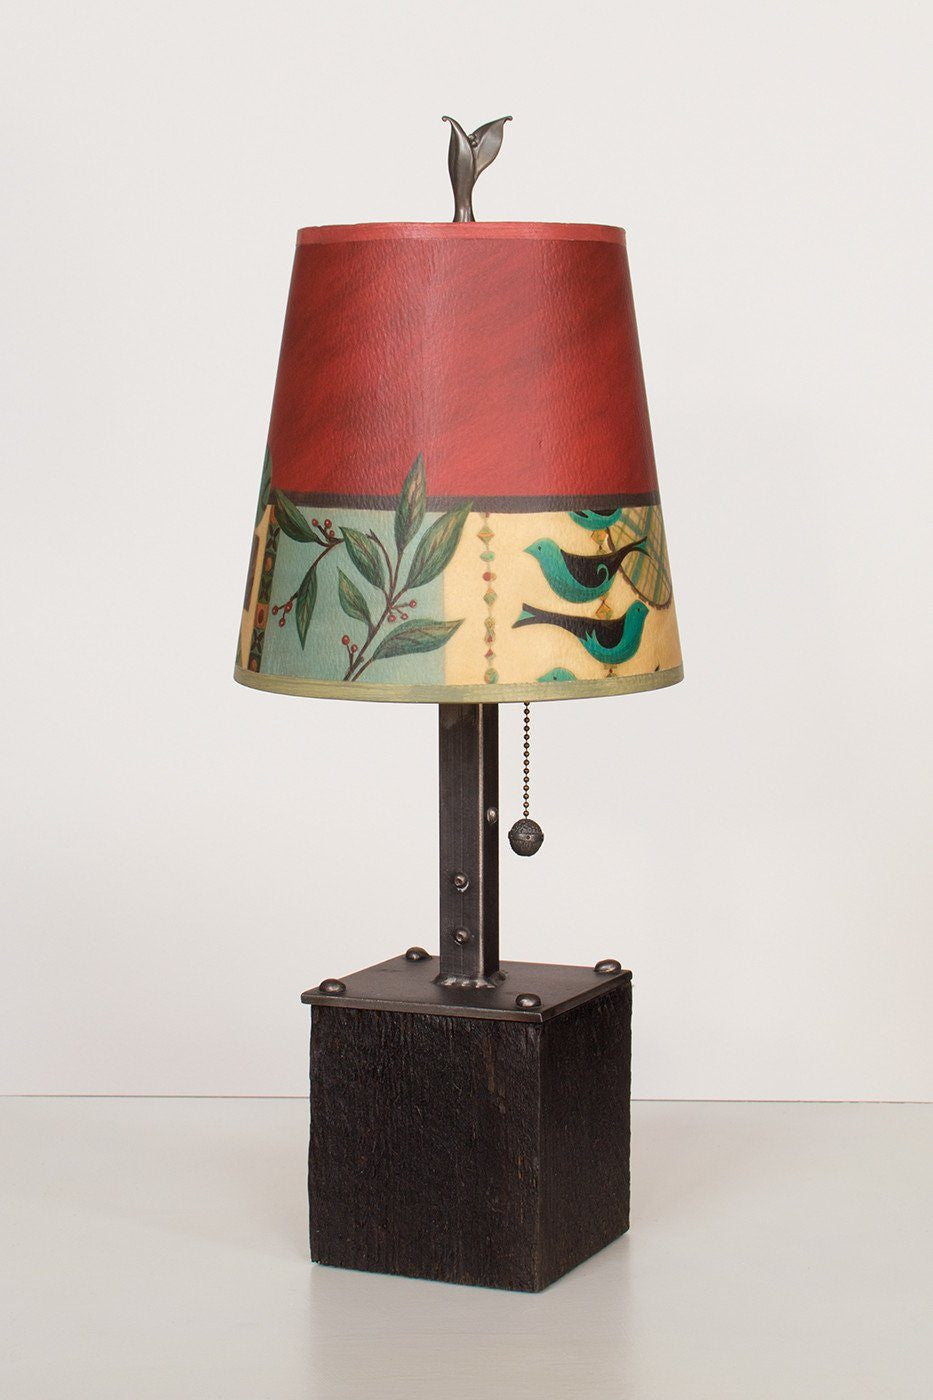 Steel Table Lamp on Reclaimed Wood with Small Drum Shade in New Capri